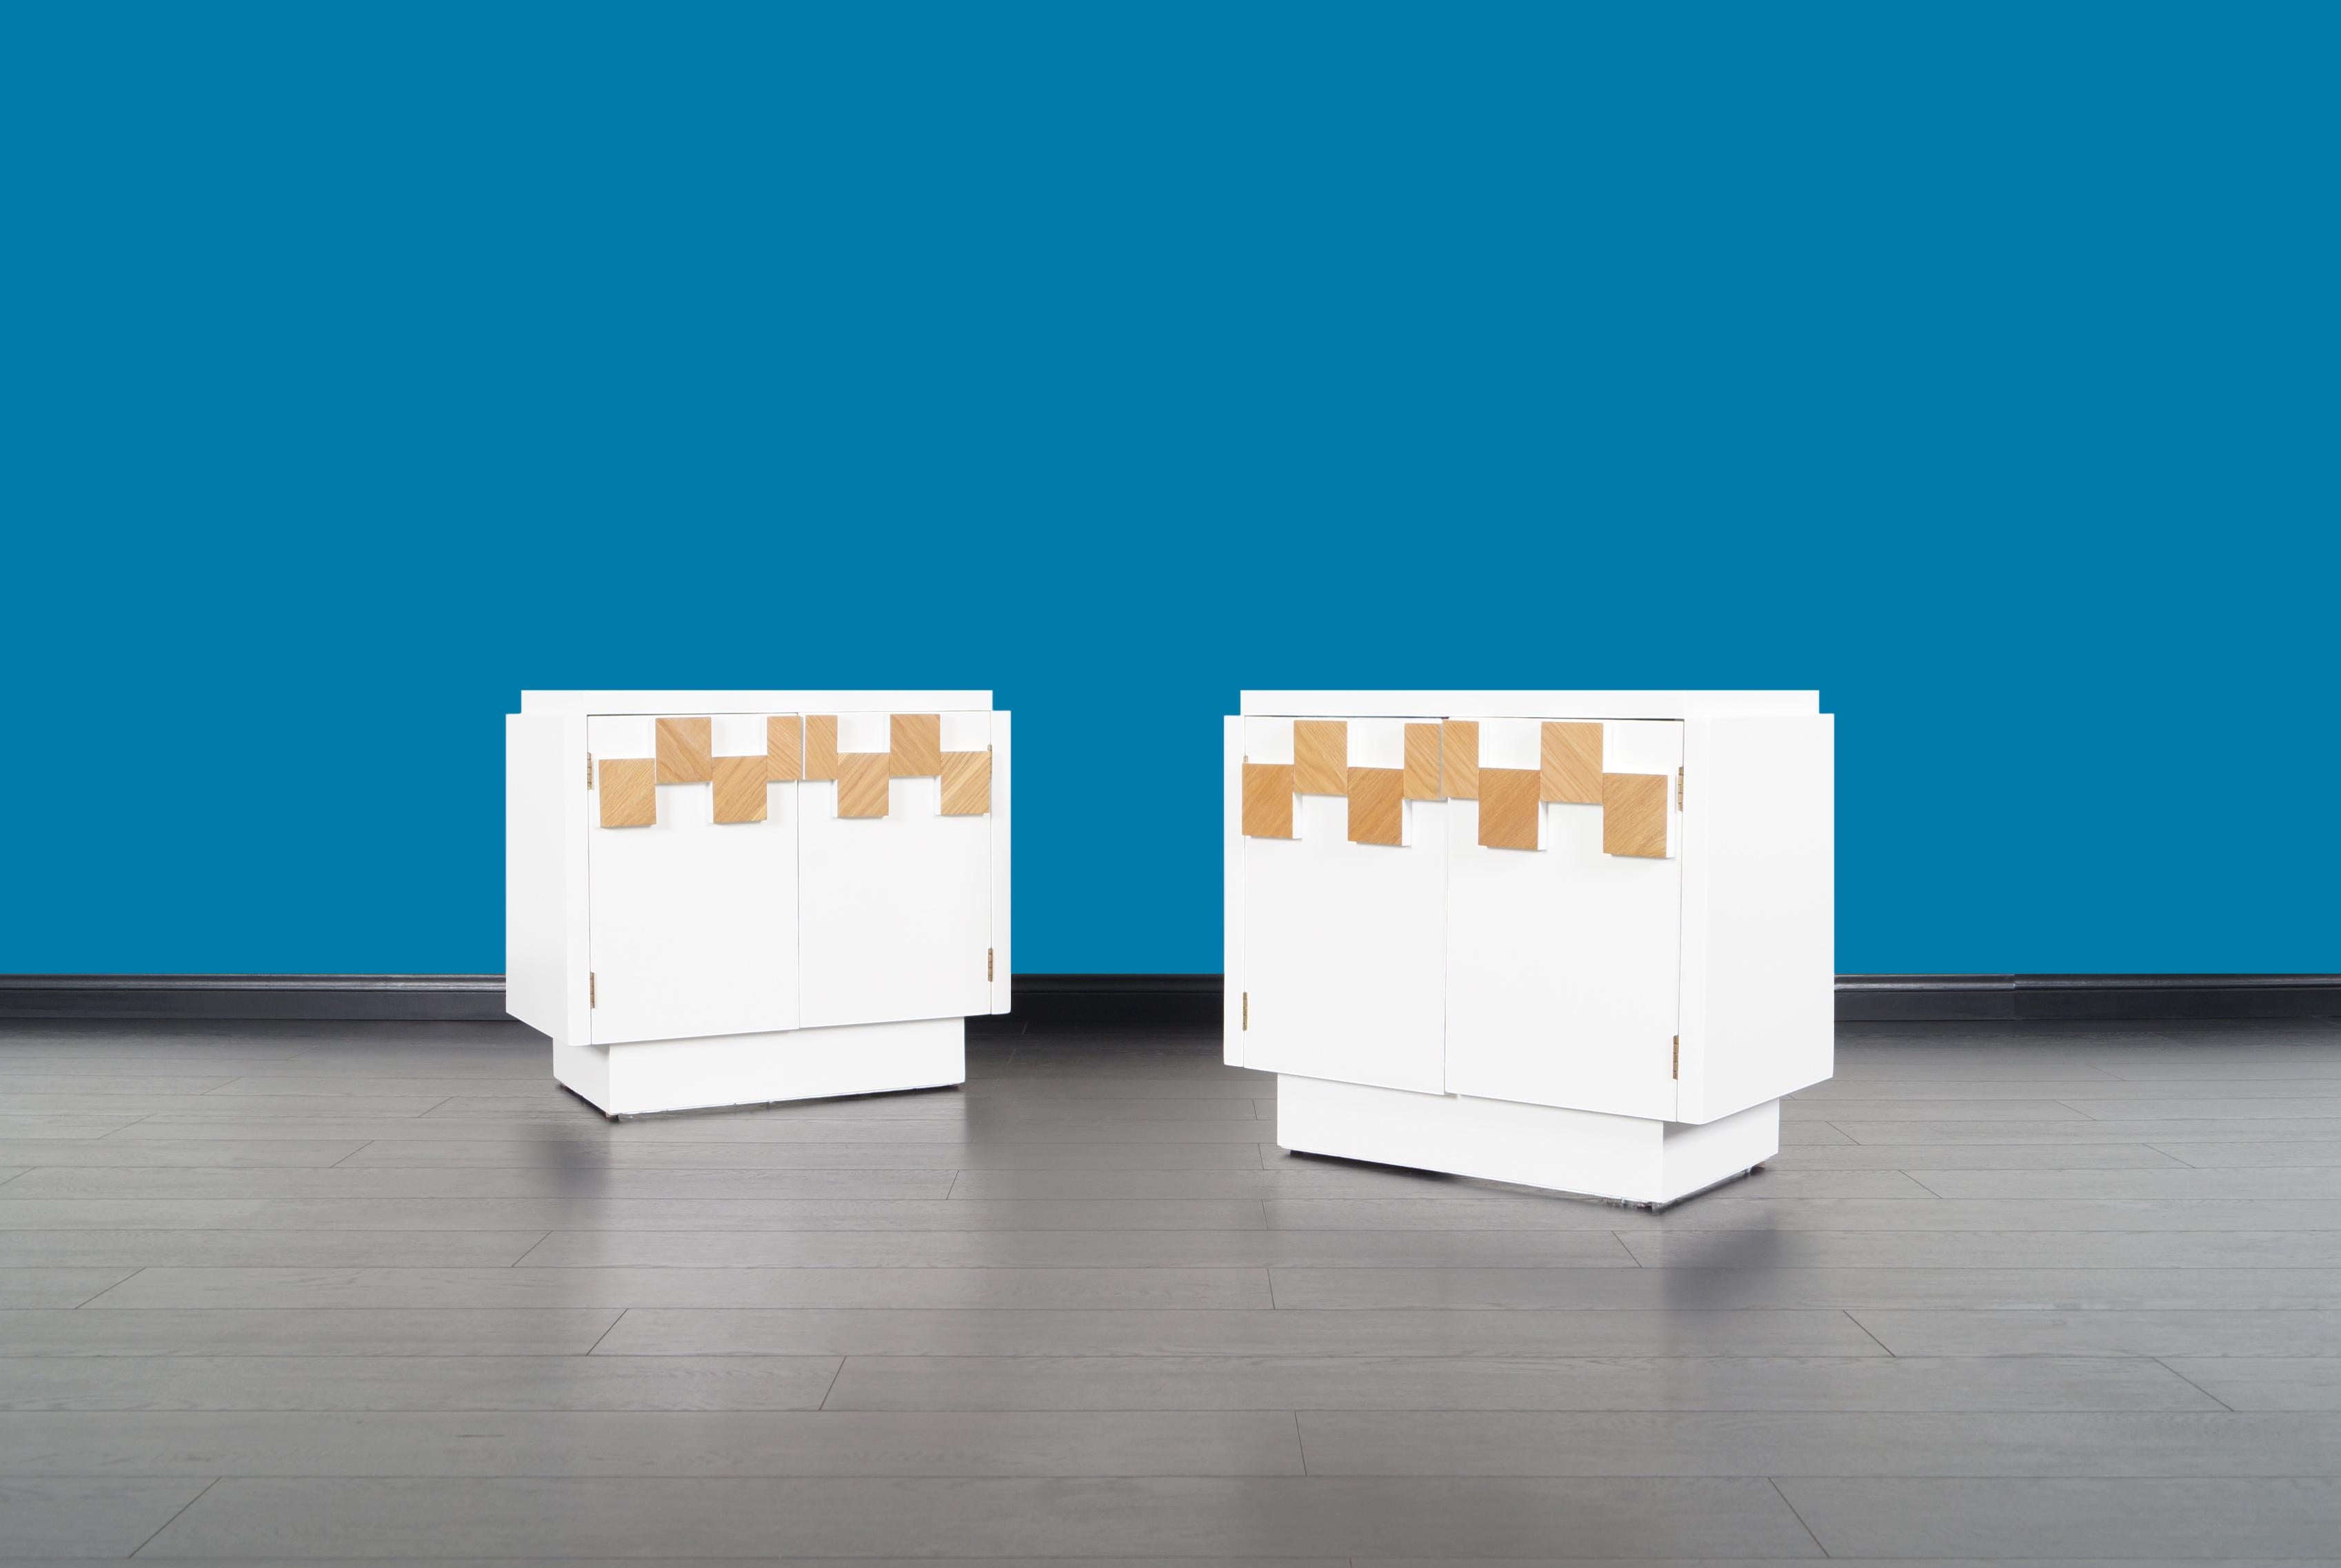 Stunning pair of vintage Brutalist mosaic nightstands manufactured by Lane in the United States. Each table comes with two doors and a fixed shelf inside, all integrated with geometric shapes on the front side. Its versatility allows it to serve as